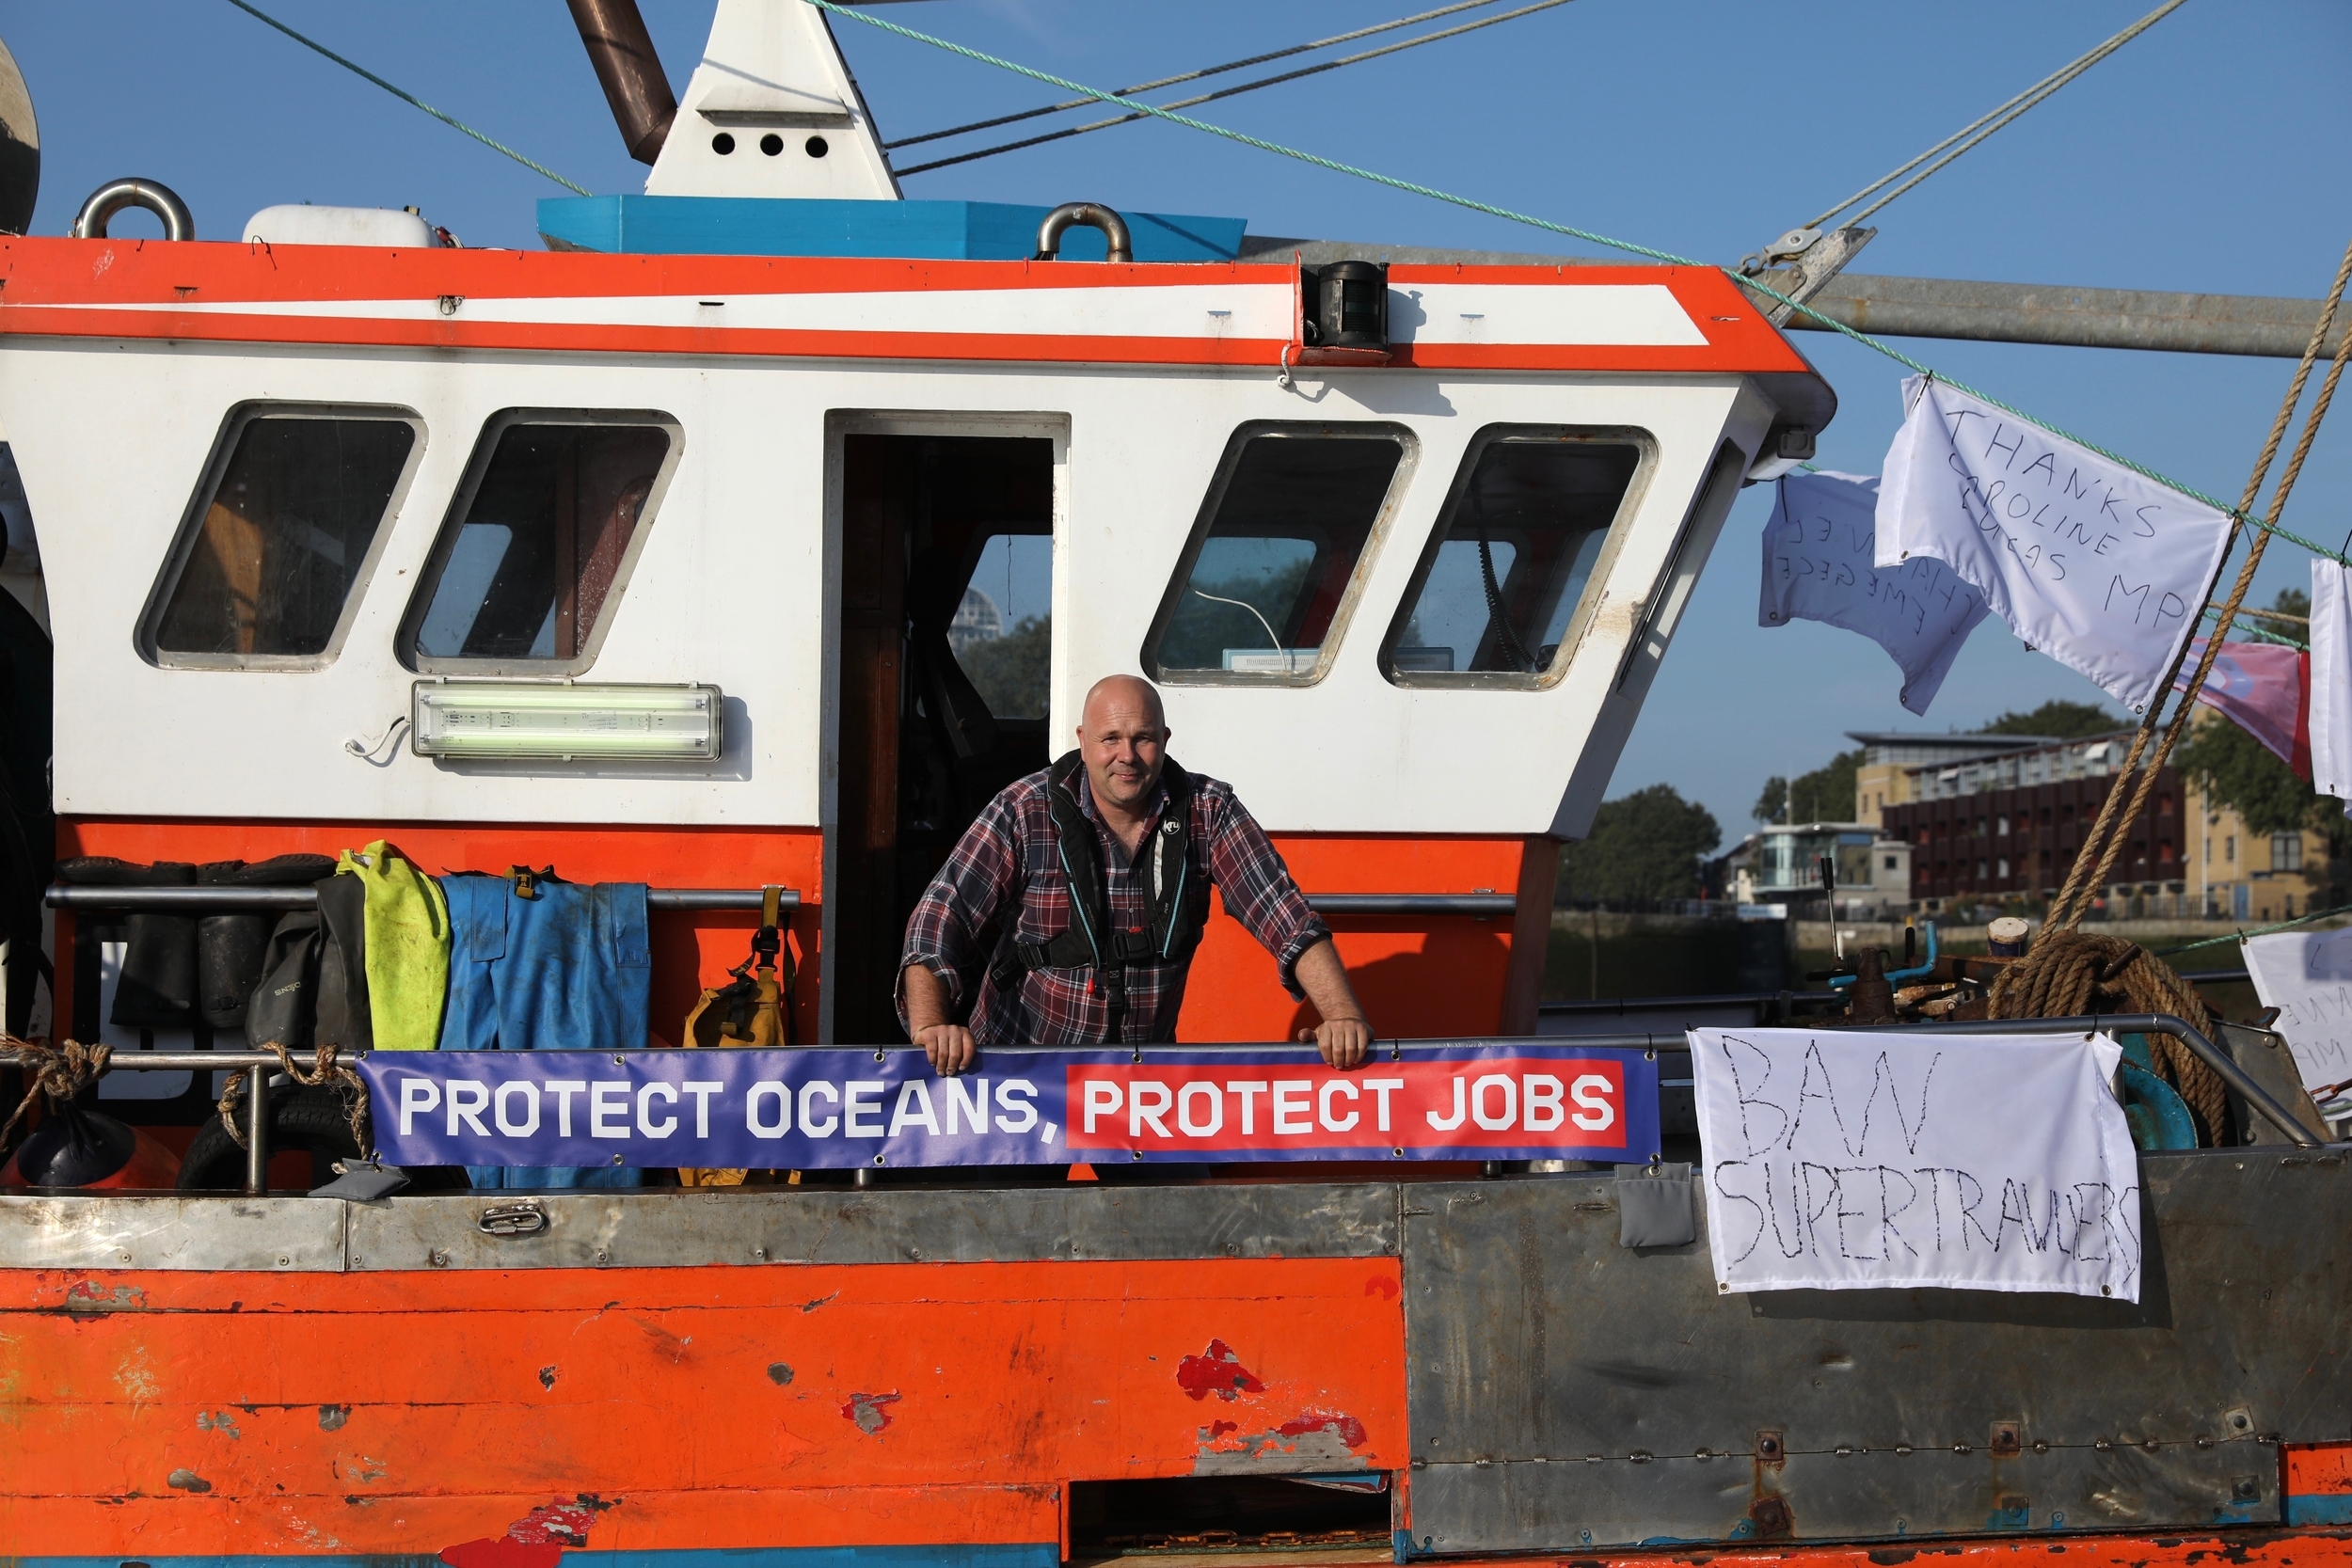 A fisherman leans over the rail of his small boat, smiling at the camera. Banners hang from the side of the boat, reading "Protect oceans, protect jobs" and "Ban Supertrawlers".